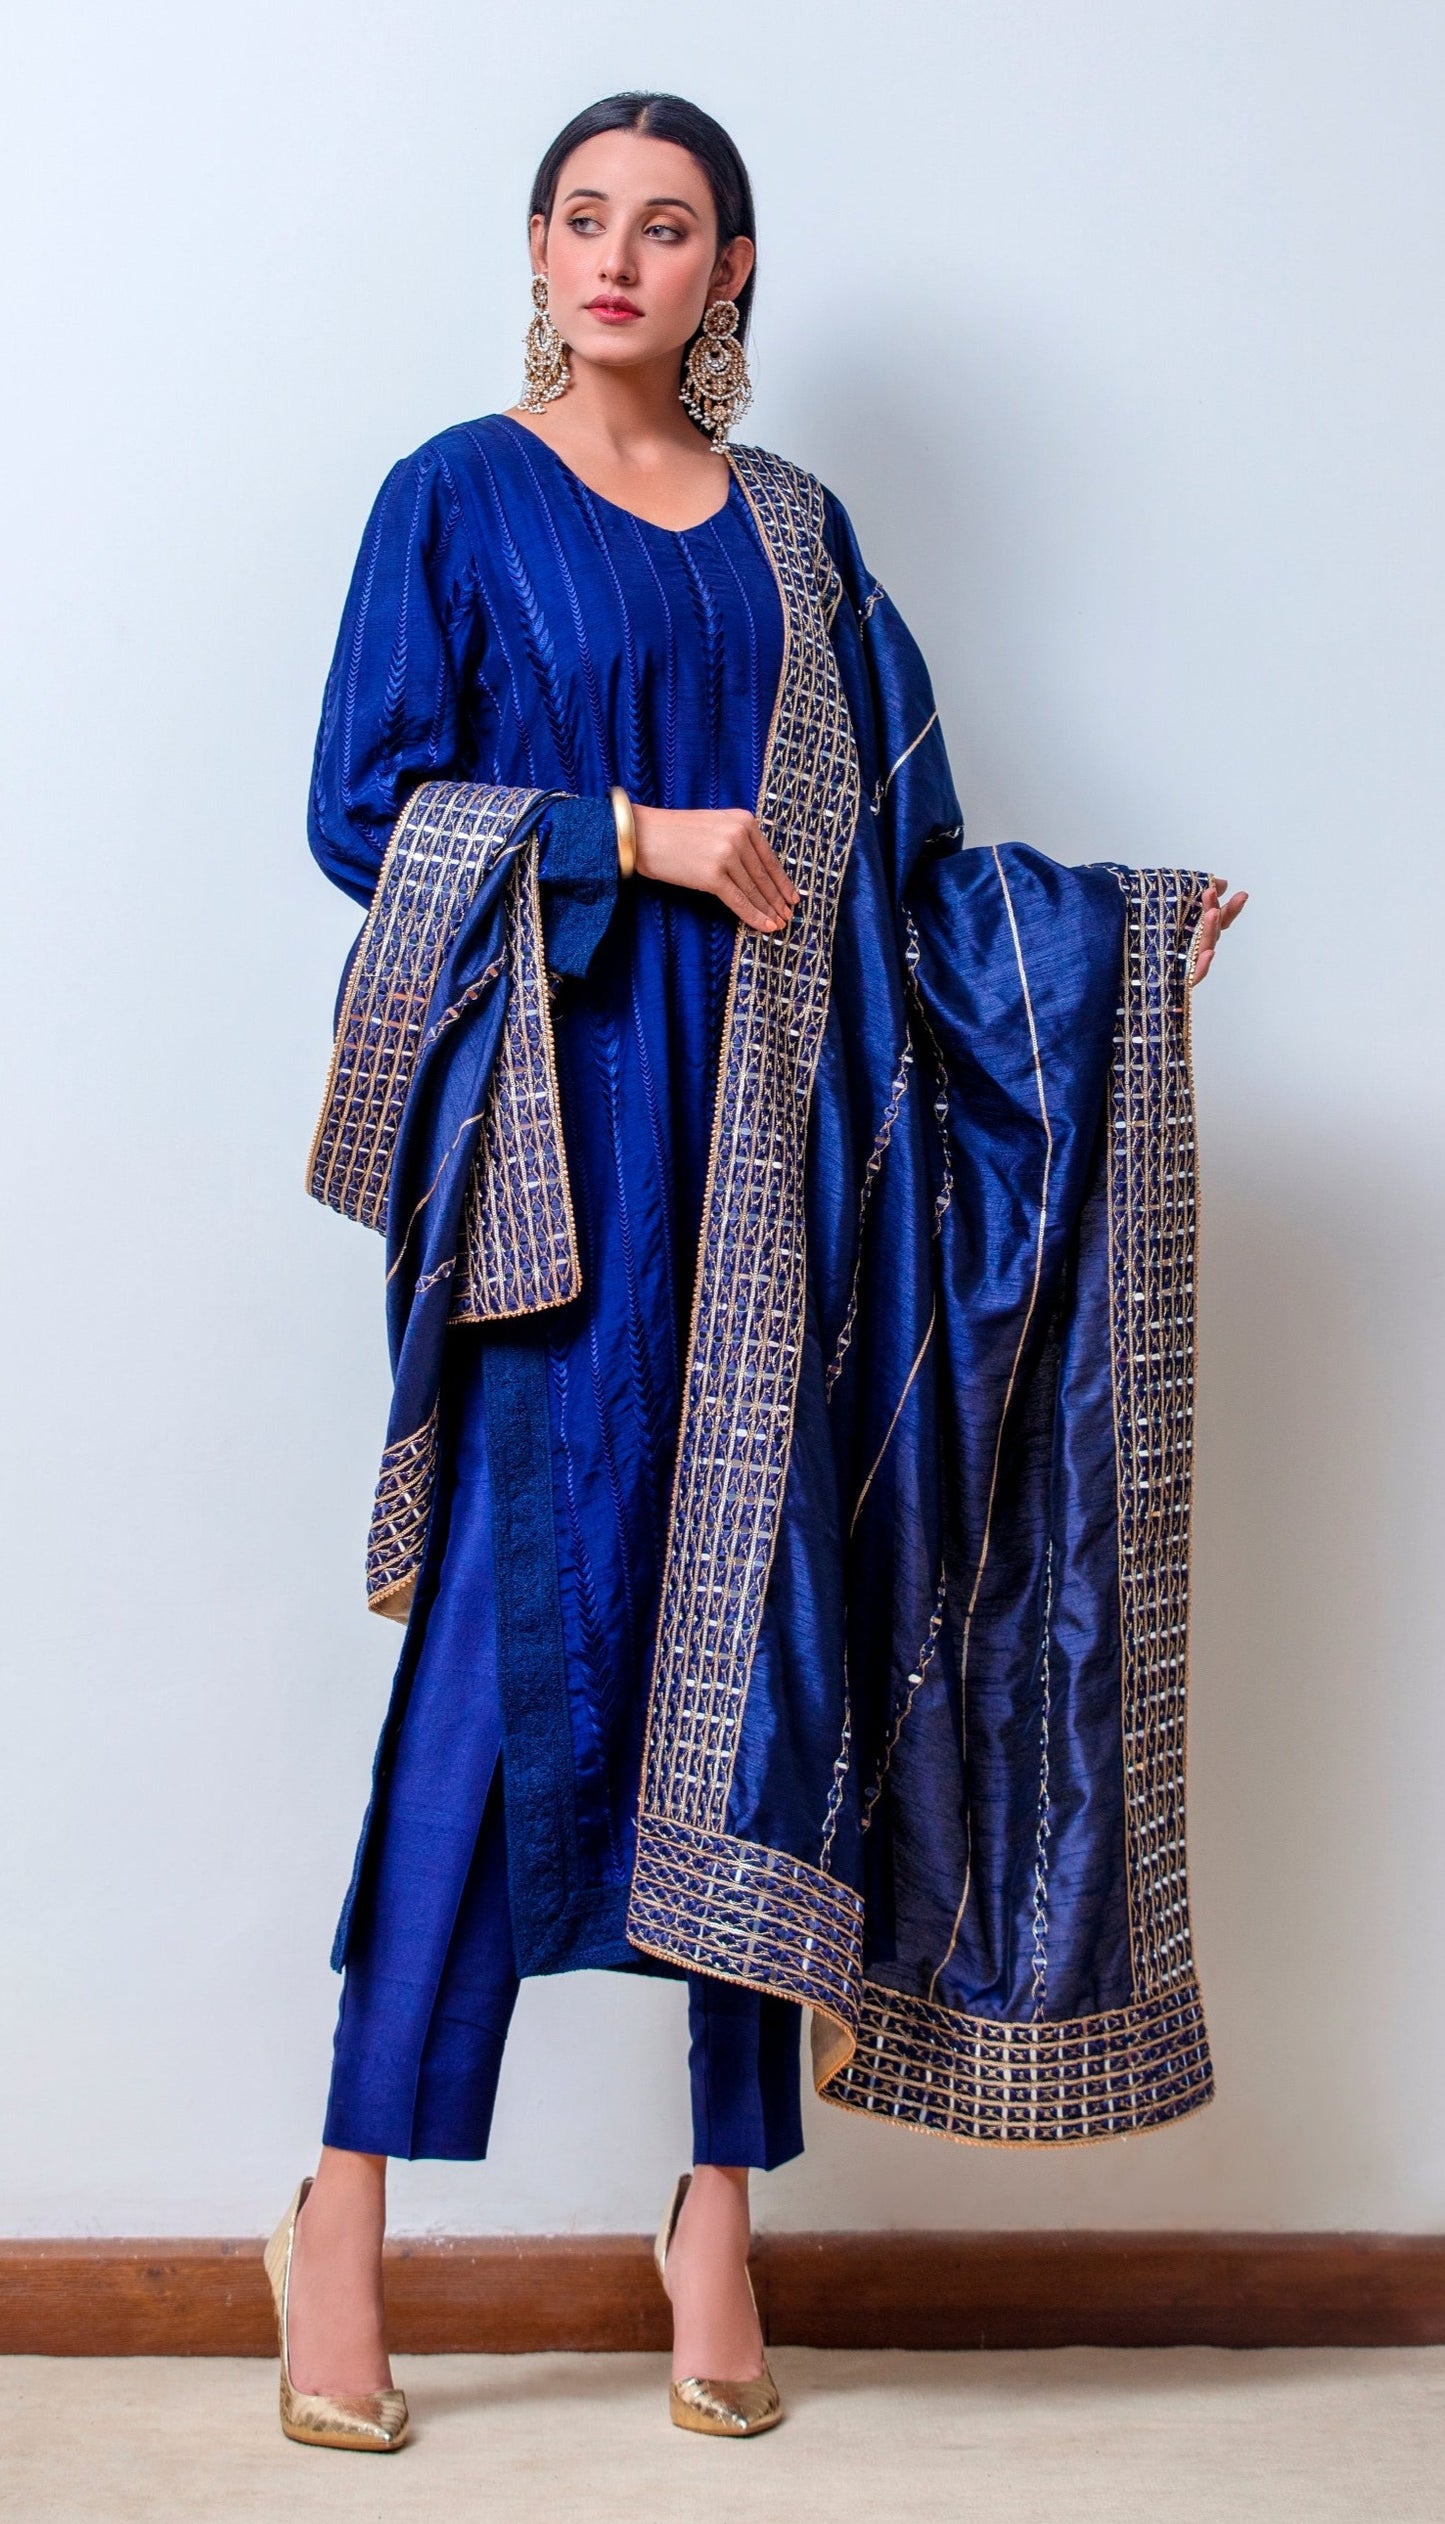 Raw Silk shawl with Mirror work on Borders (Suit Optional)